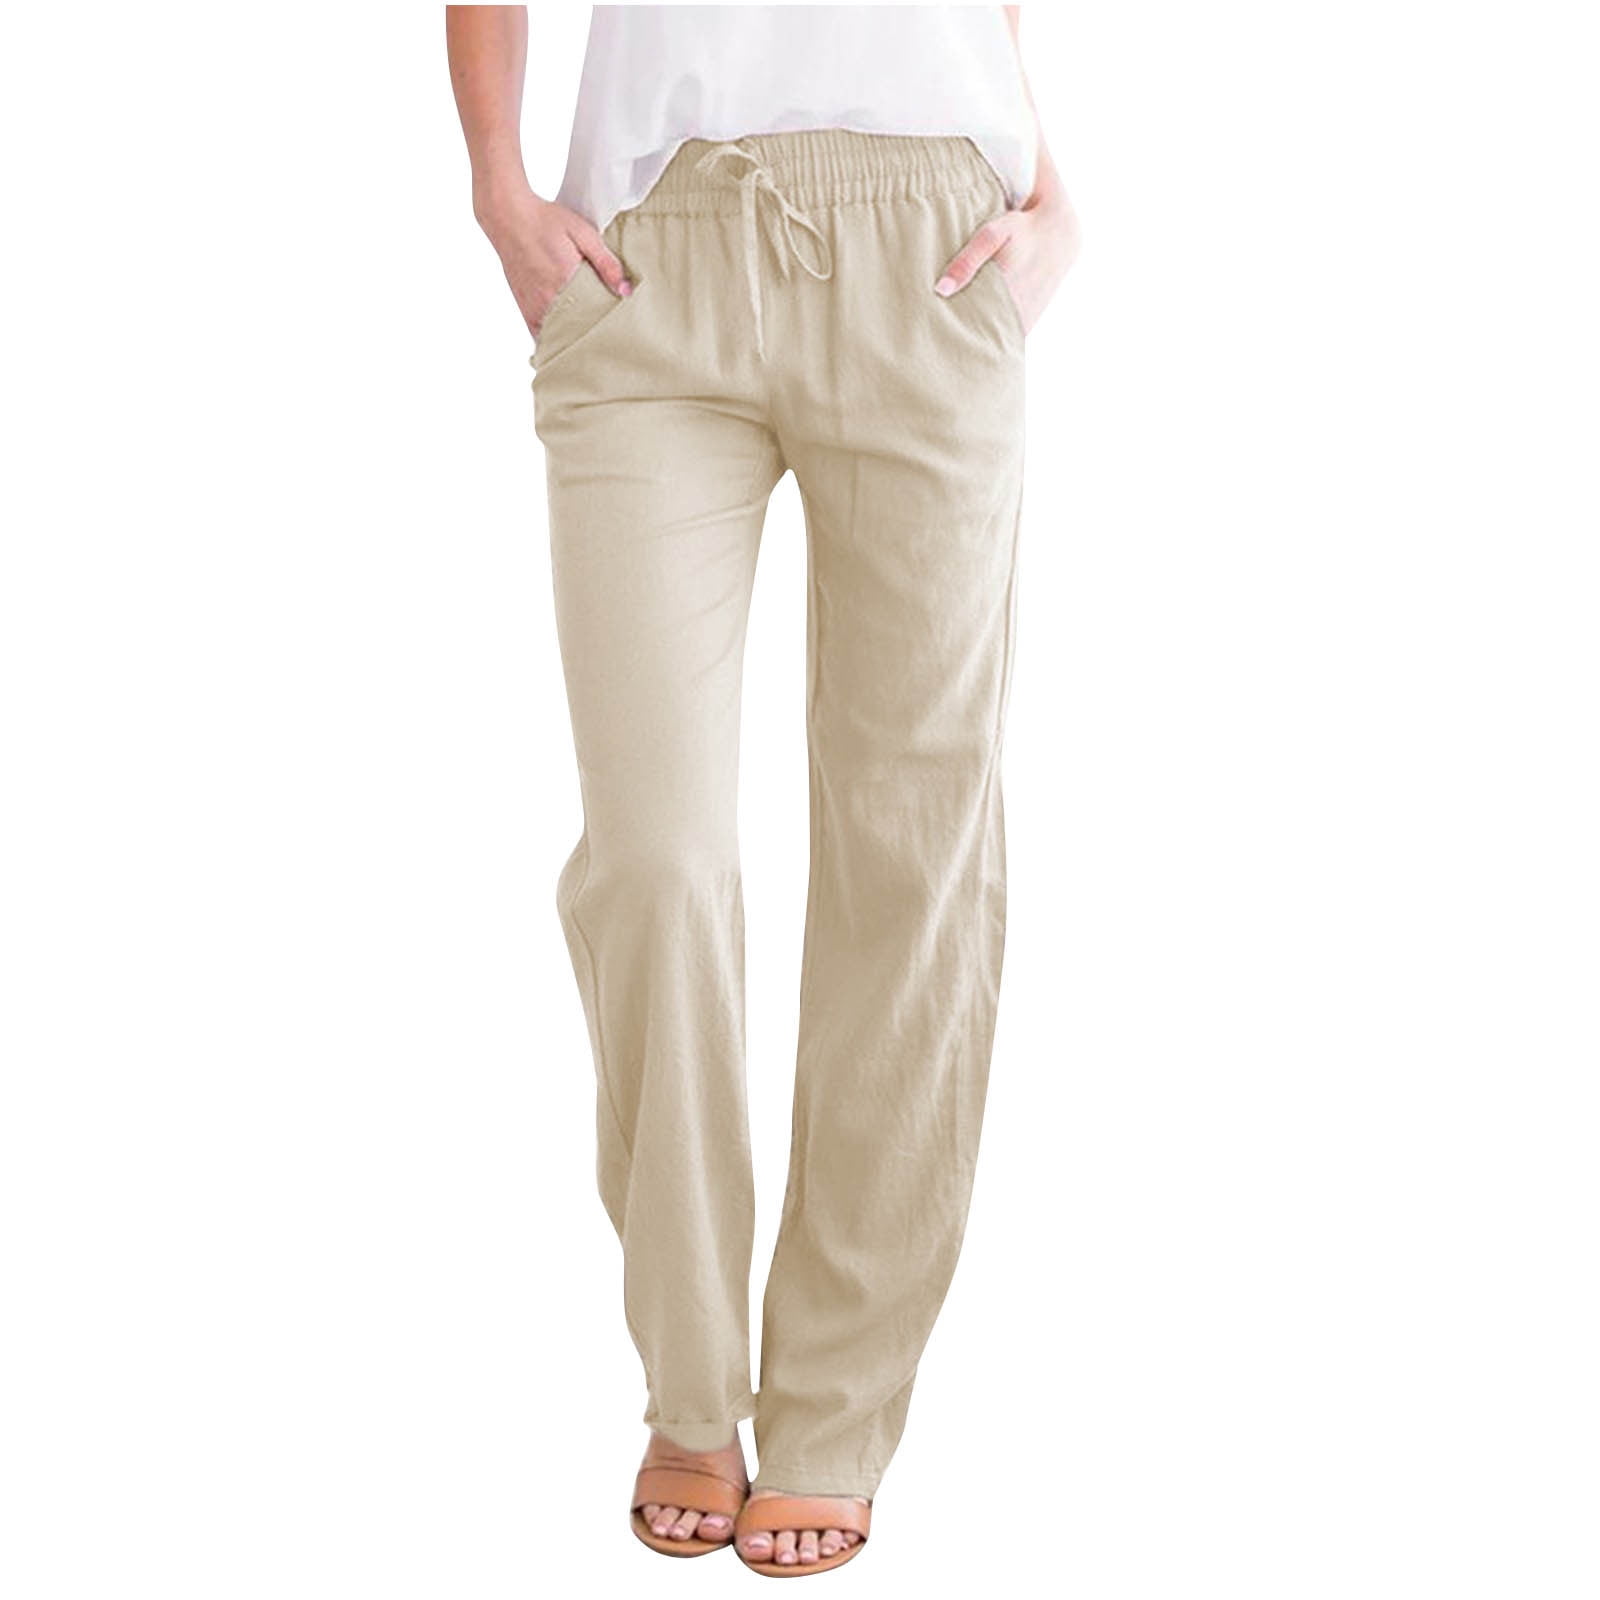 Dropship Women Casual Yoga Pants Loose Linen Trousers to Sell Online at a  Lower Price